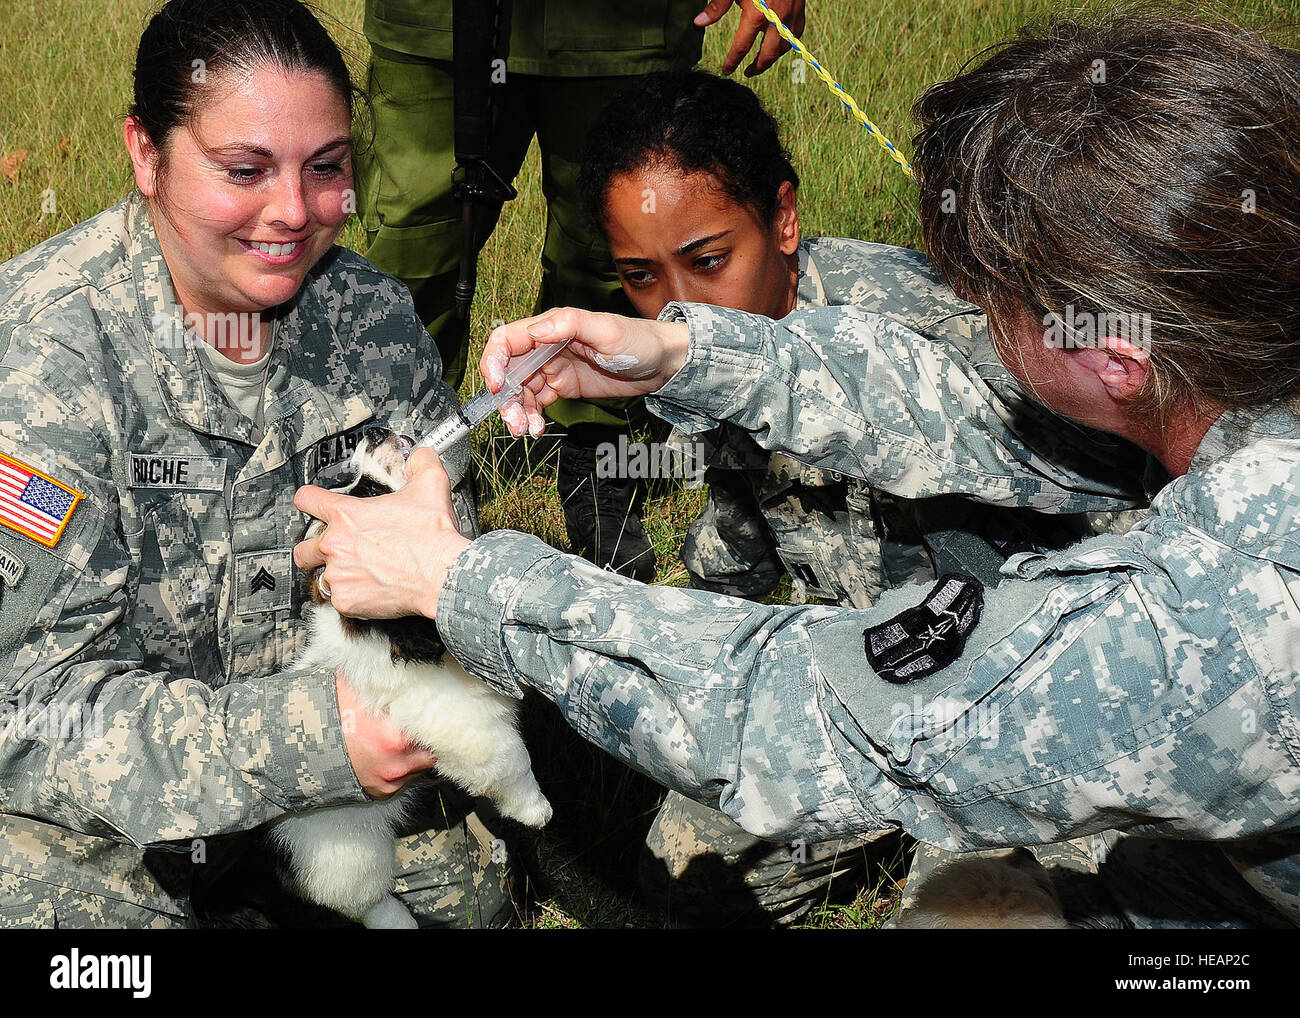 U.S. Army Sgt. Carly Roche, (left) veterinary technician from the 719th Medical Detachment Veterinary Services, Fort Sheridan, Ill., holds a puppy while U.S. Army Maj. Erica Mcnaul, veterinarian from the 719th Medical Detachment Veterinary Services, Fort Sheridan, Ill., provides de-wormer at Orange Walk, Belize April 17, 2013.  Medical professionals from the U.S. are providing free veterinary treatment at multiple veterinary readiness training exercises throughout Belize as part of an exercise known as New Horizons. The VETRETES are designed to provide vaccinations to animals in several commun Stock Photo